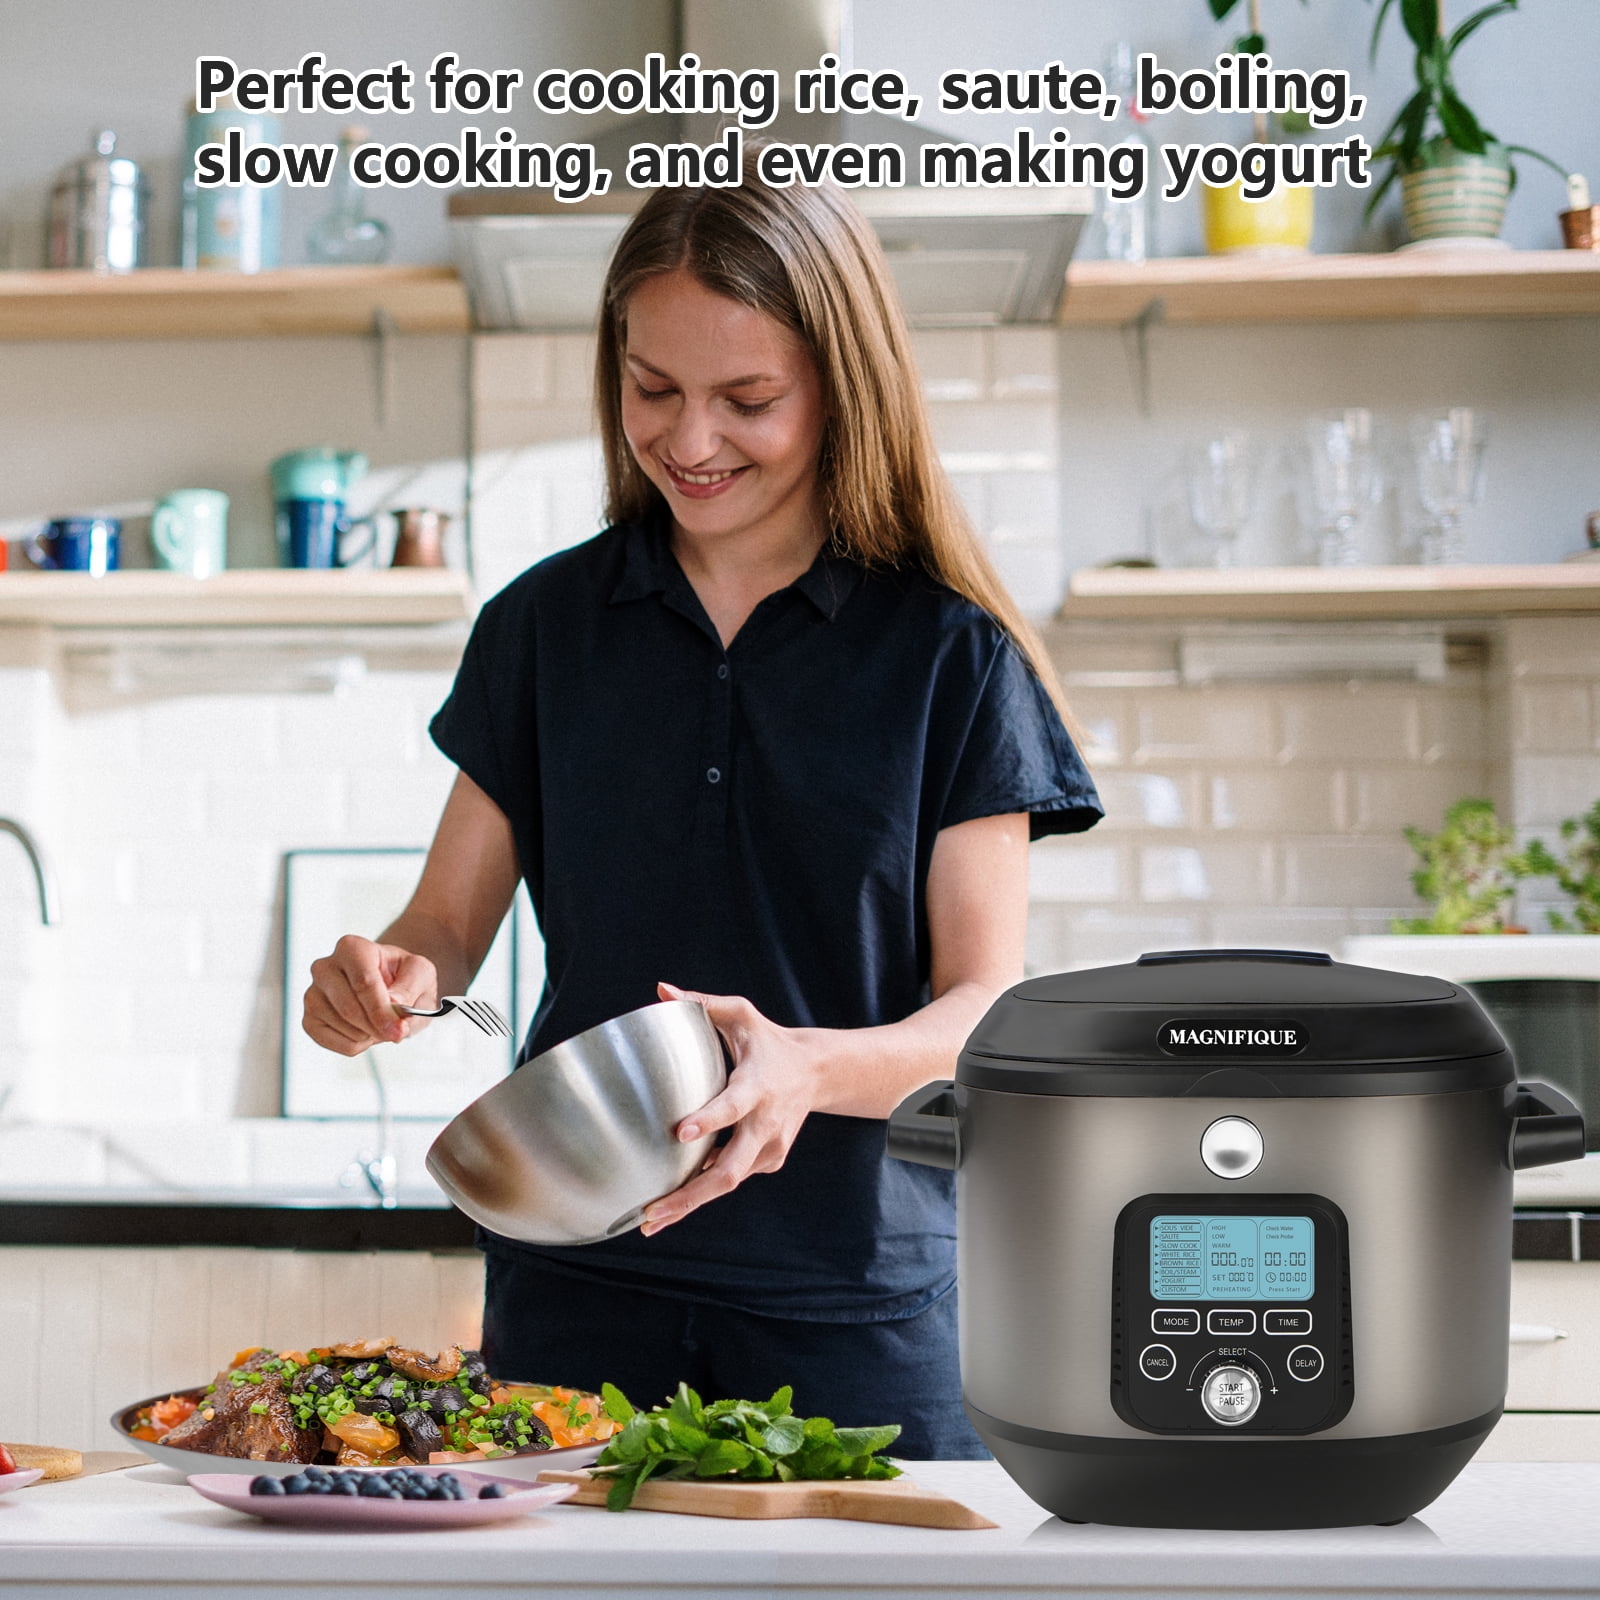  MAGNIFIQUE 6 Quart Sous Vide Cooker: The Ultimate Solution for  Superbly Cooked Meals Every Time, 8-in-1 to Steam, Bake, Roast, Sear,  Sauté, Yogurt Maker, Delay Start Programmable, Stainless Steel : Home